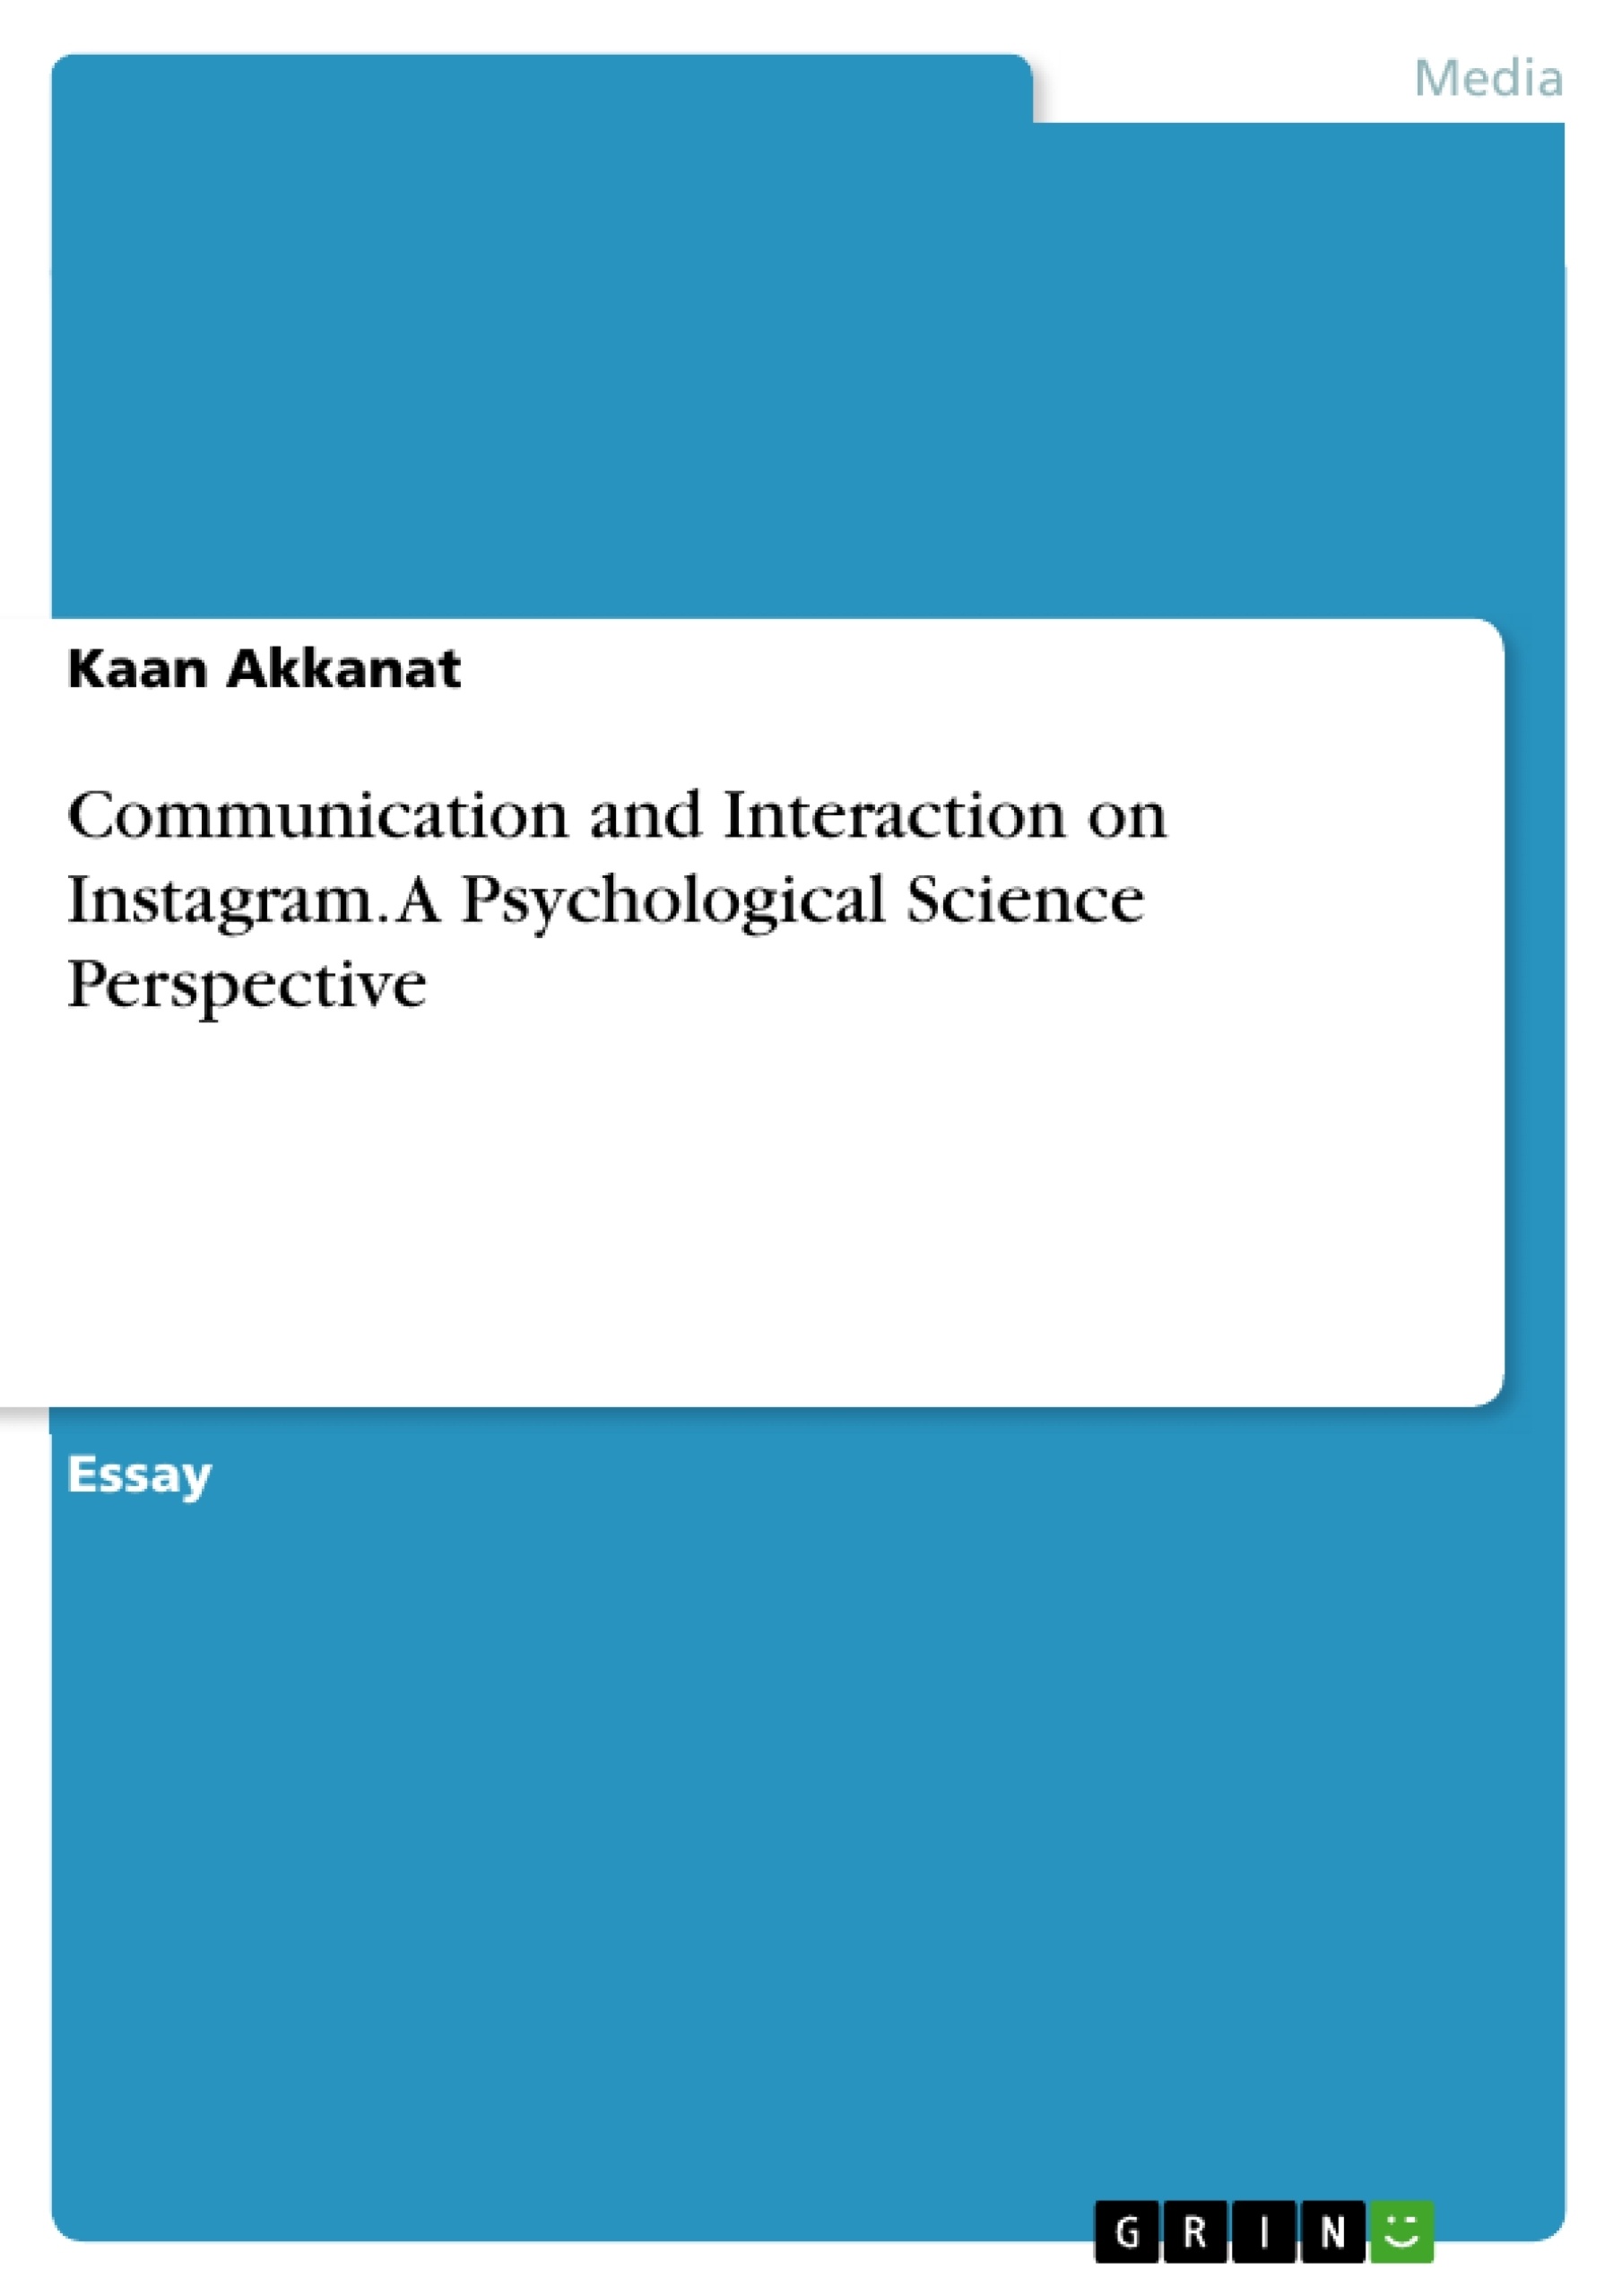 Title: Communication and Interaction on Instagram. A Psychological Science Perspective